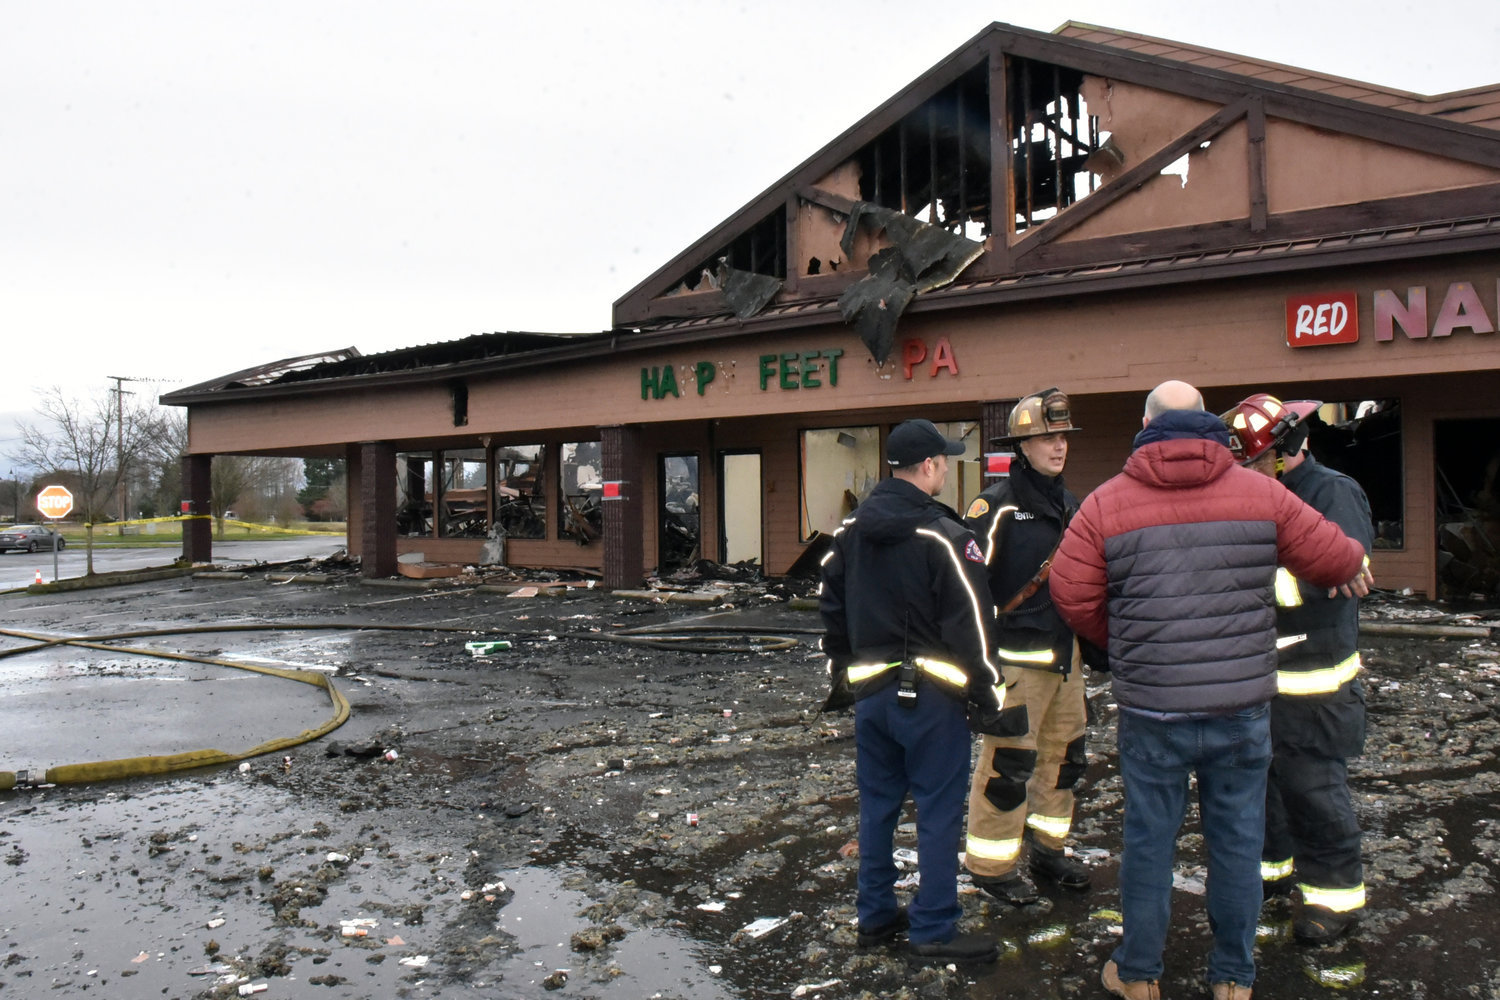 The Nisqually Plaza strip mall was the scene of a fire early in the morning on Dec. 22, 2021. The blaze destroyed Freedom Training Center, Happy Feet Spa and Red Nails salon. Fire crews put out the fire within two hours.